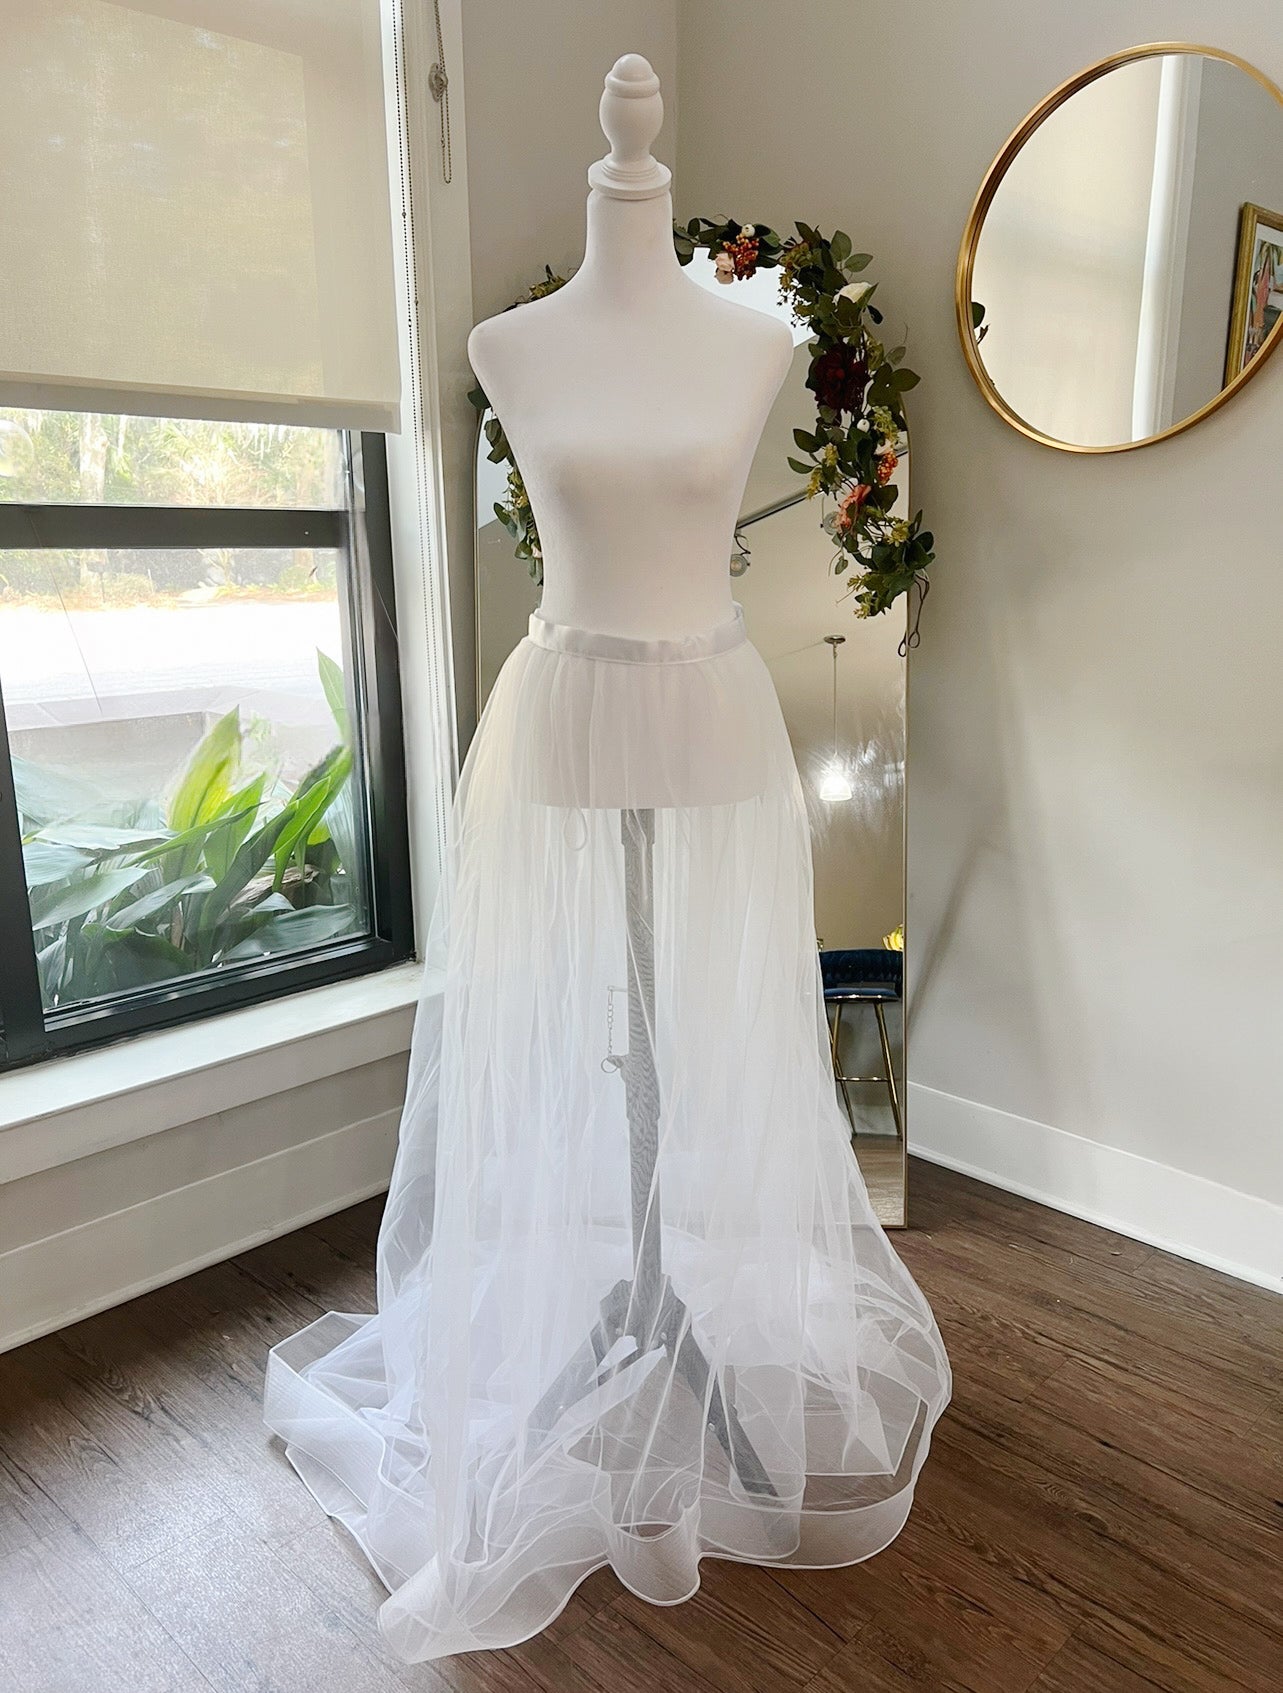 Simple Two Layers Tulle Bridal Overskirt Horsehair Netting Trim